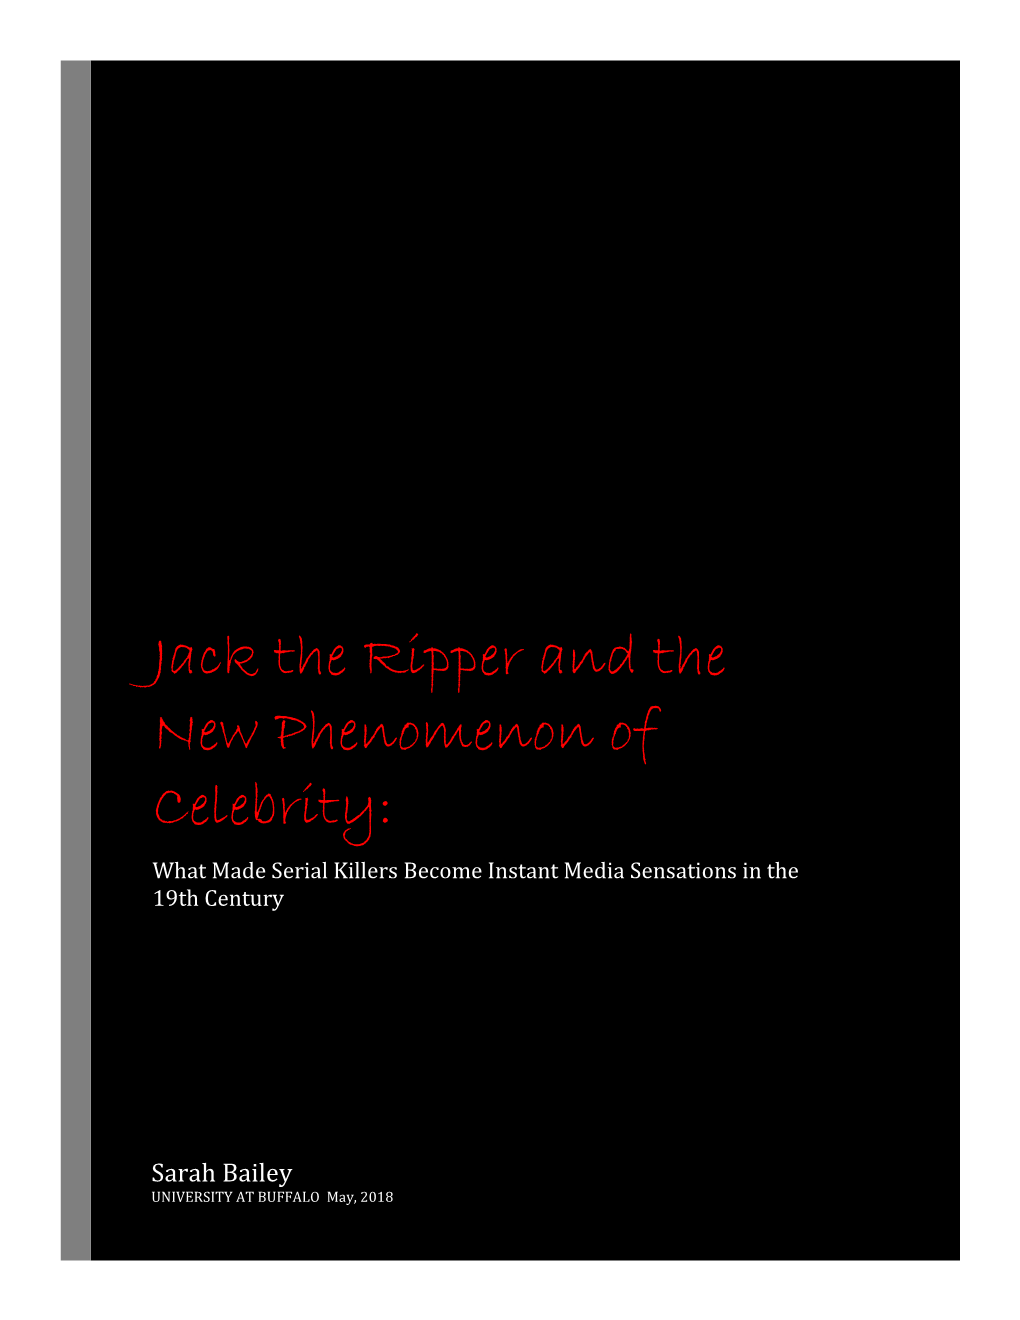 Jack the Ripper and the New Phenomenon of Celebrity: What Made Serial Killers Become Instant Media Sensations in the 19Th Century